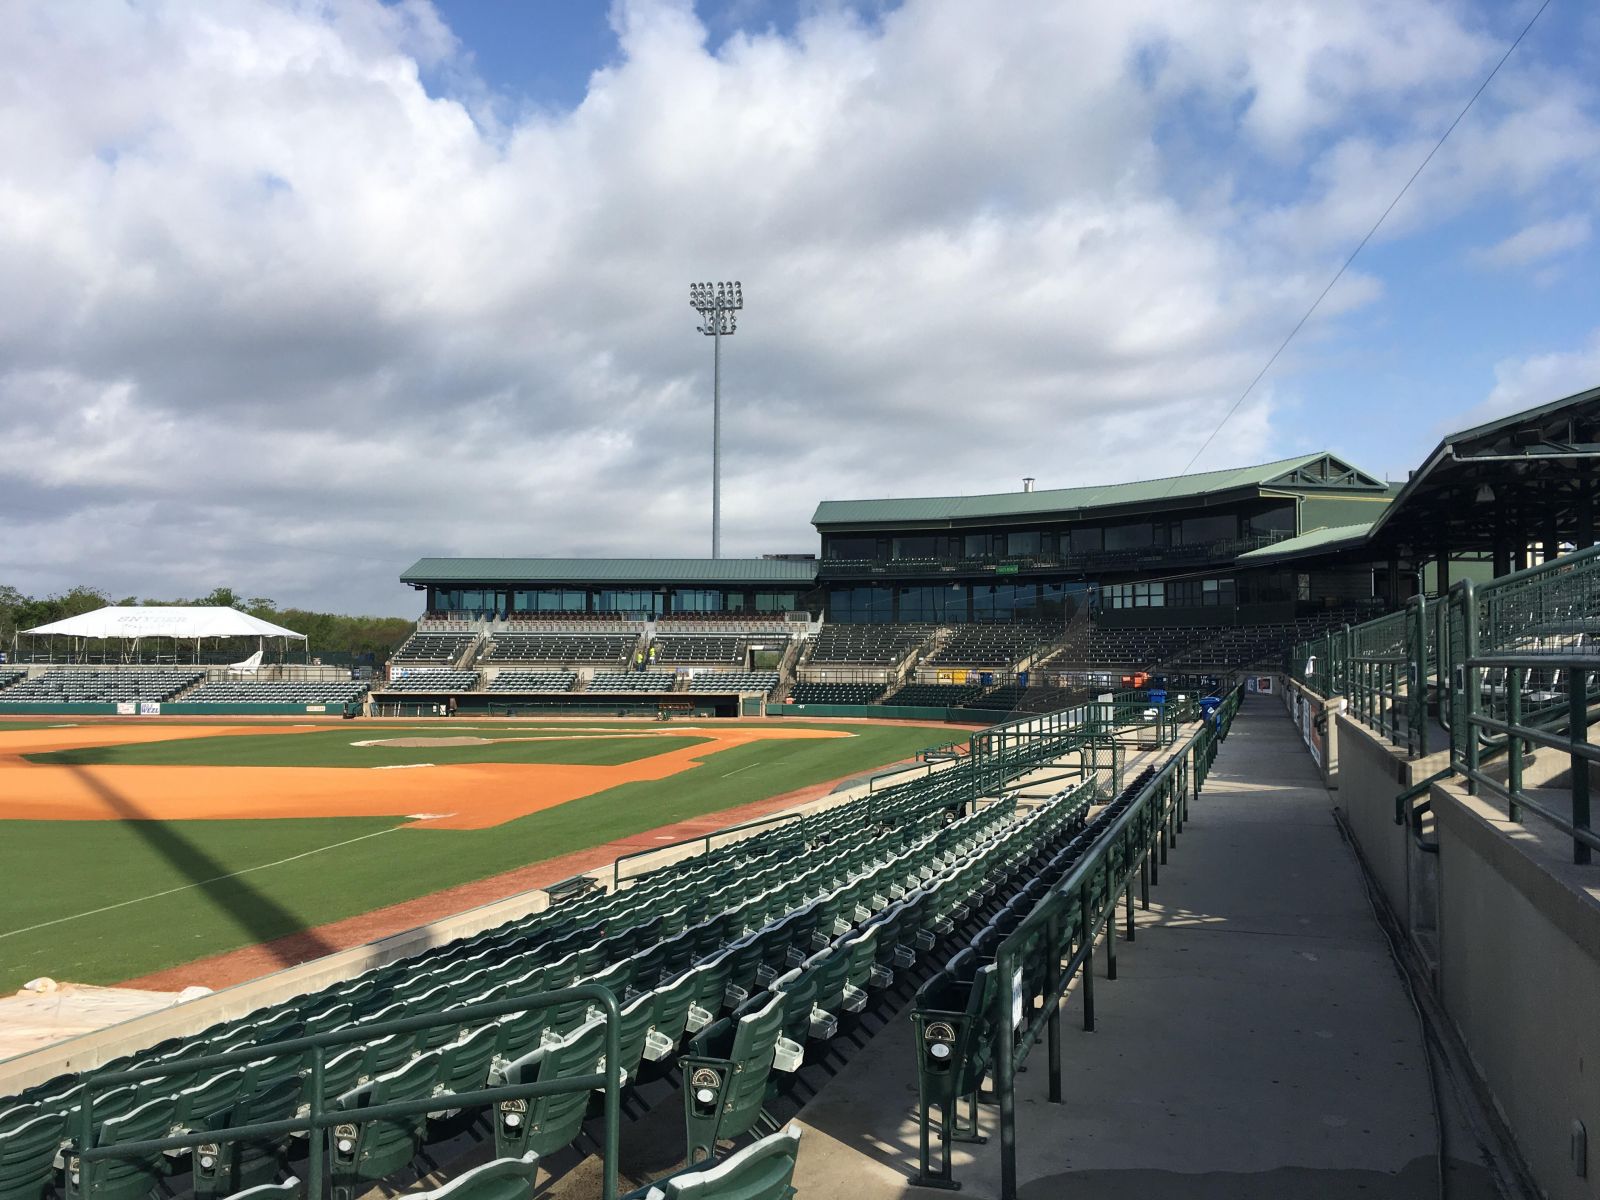 The RiverDogs baseball club plays home games at the Joseph P. Riley Jr. Park, better known as The Joe. (Photo/Provided)